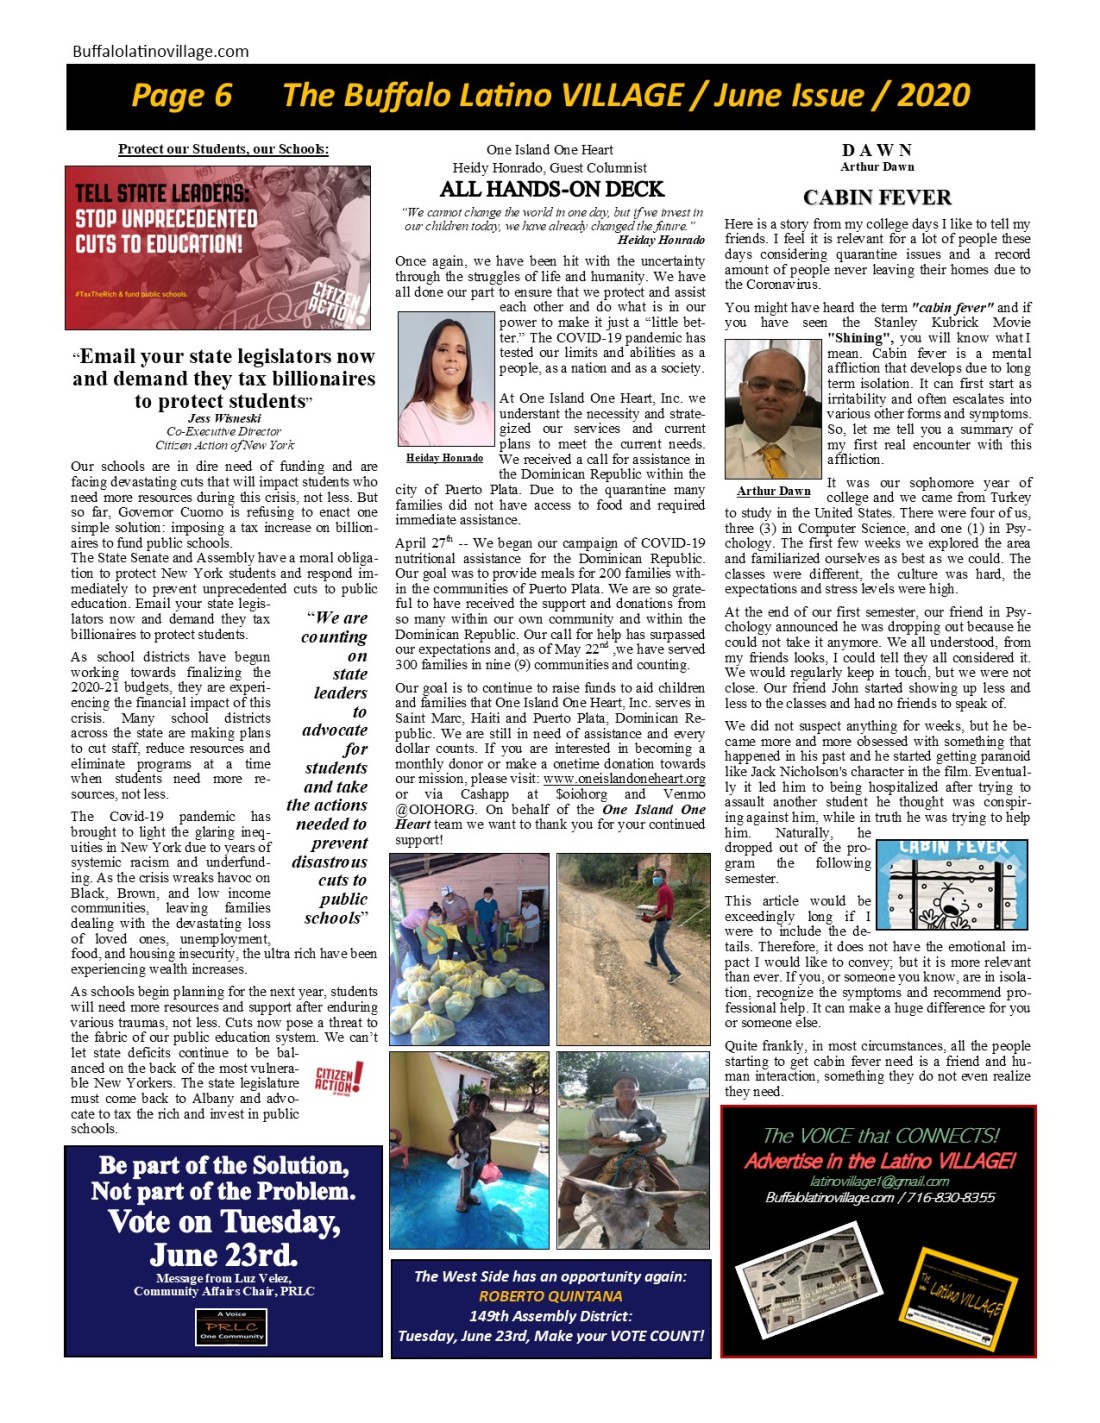 June Issue 2020 Page 6